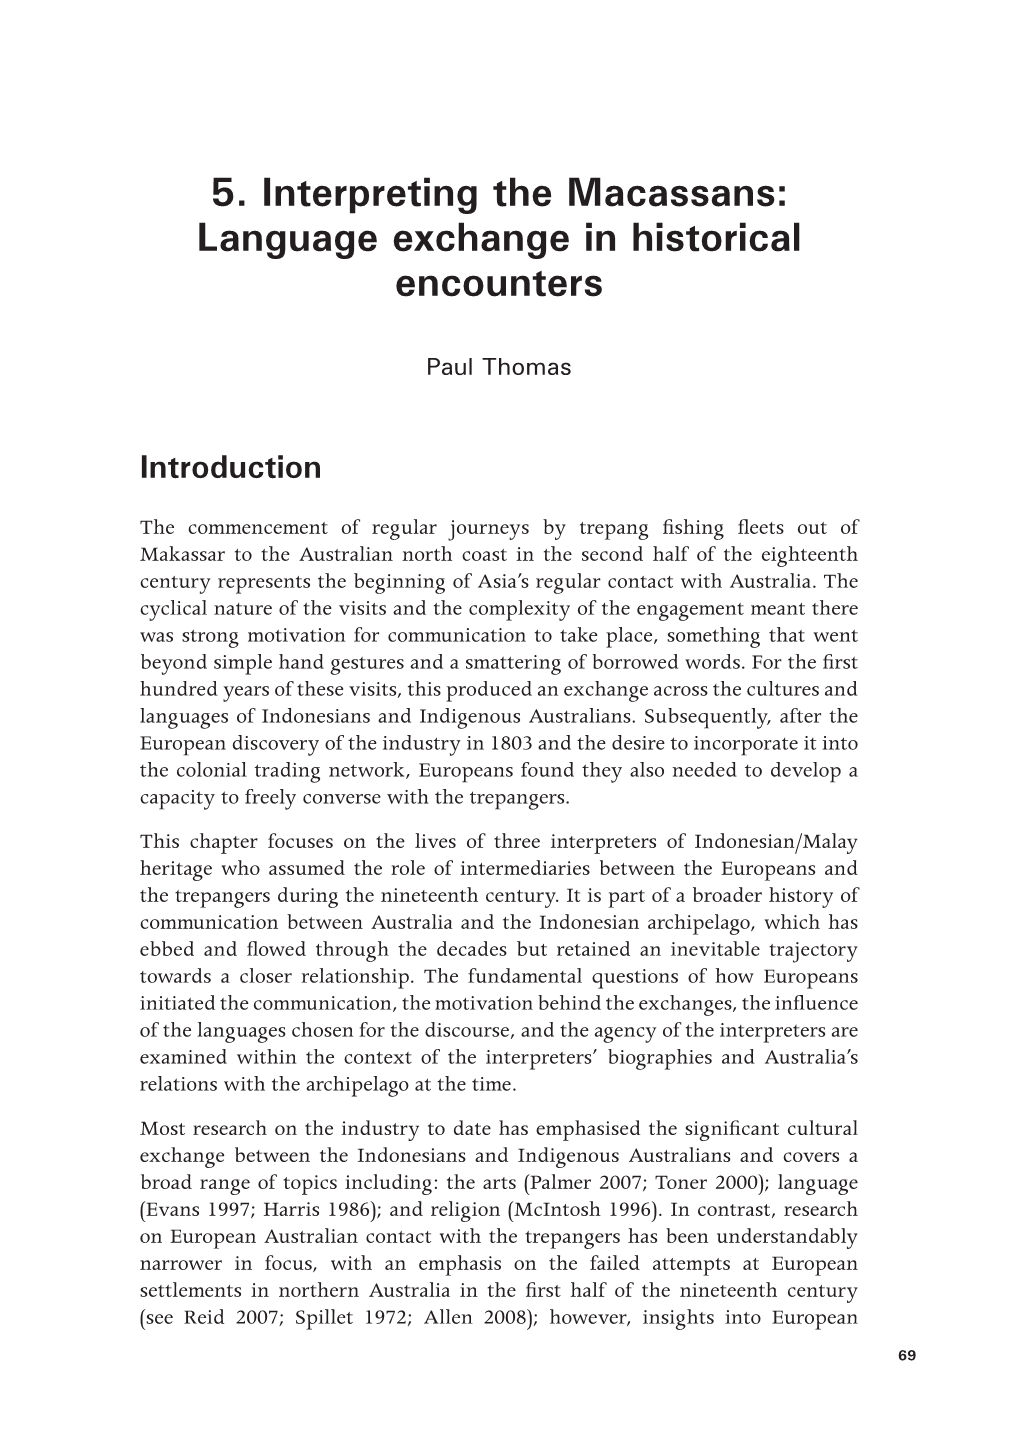 Language Exchange in Historical Encounters